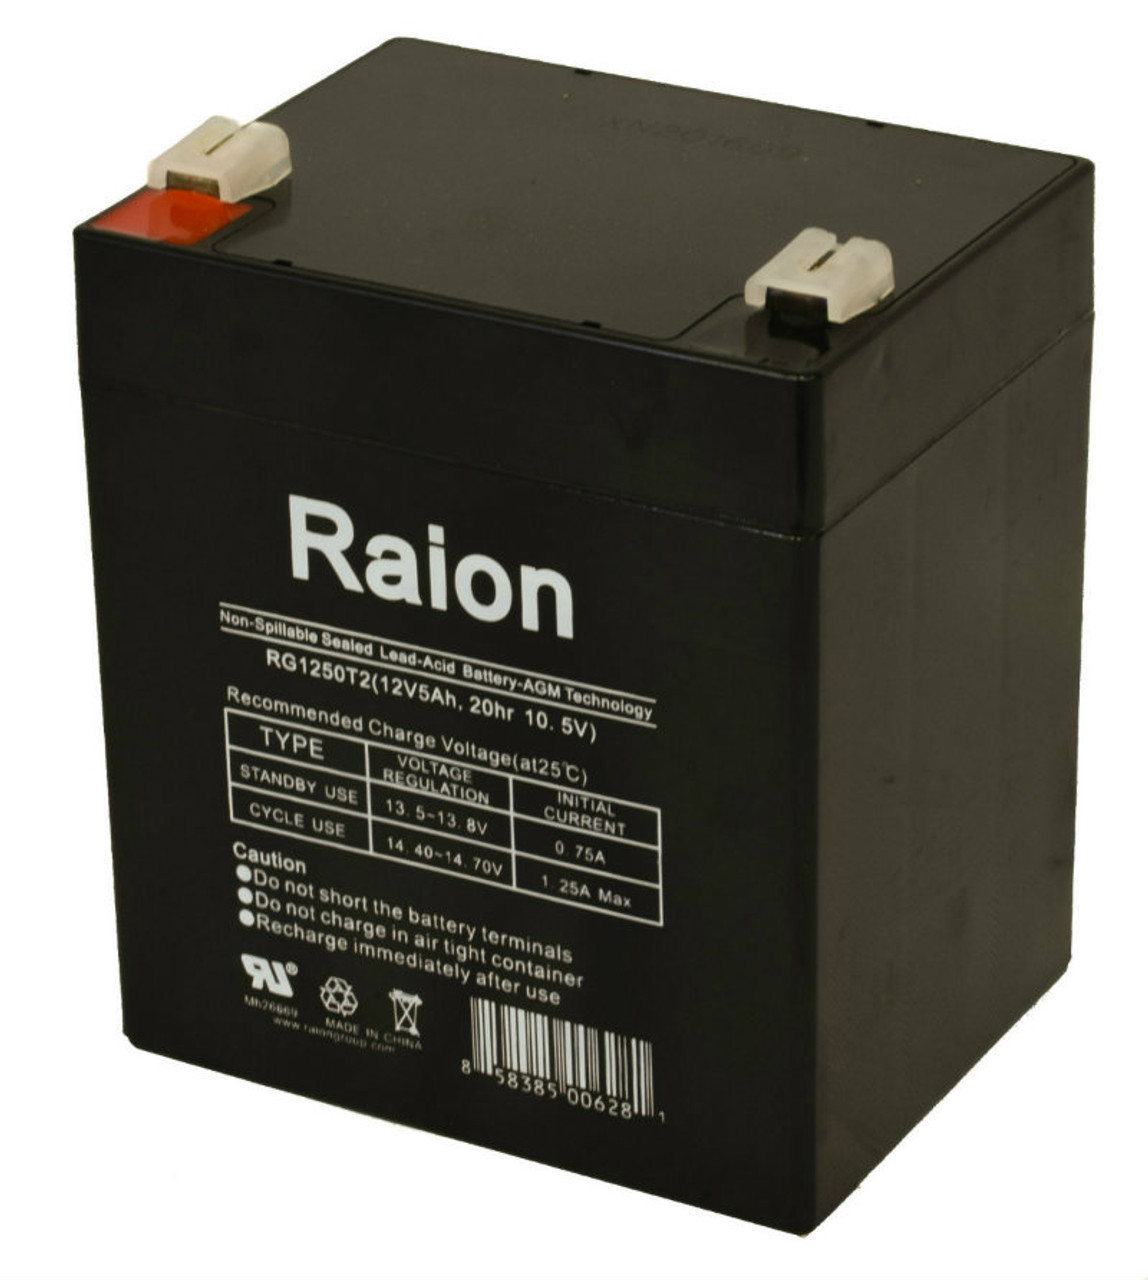 Raion Power RG1250T1 Replacement Battery for Arjo-Century Maxi Sky 2 Ceiling Lift